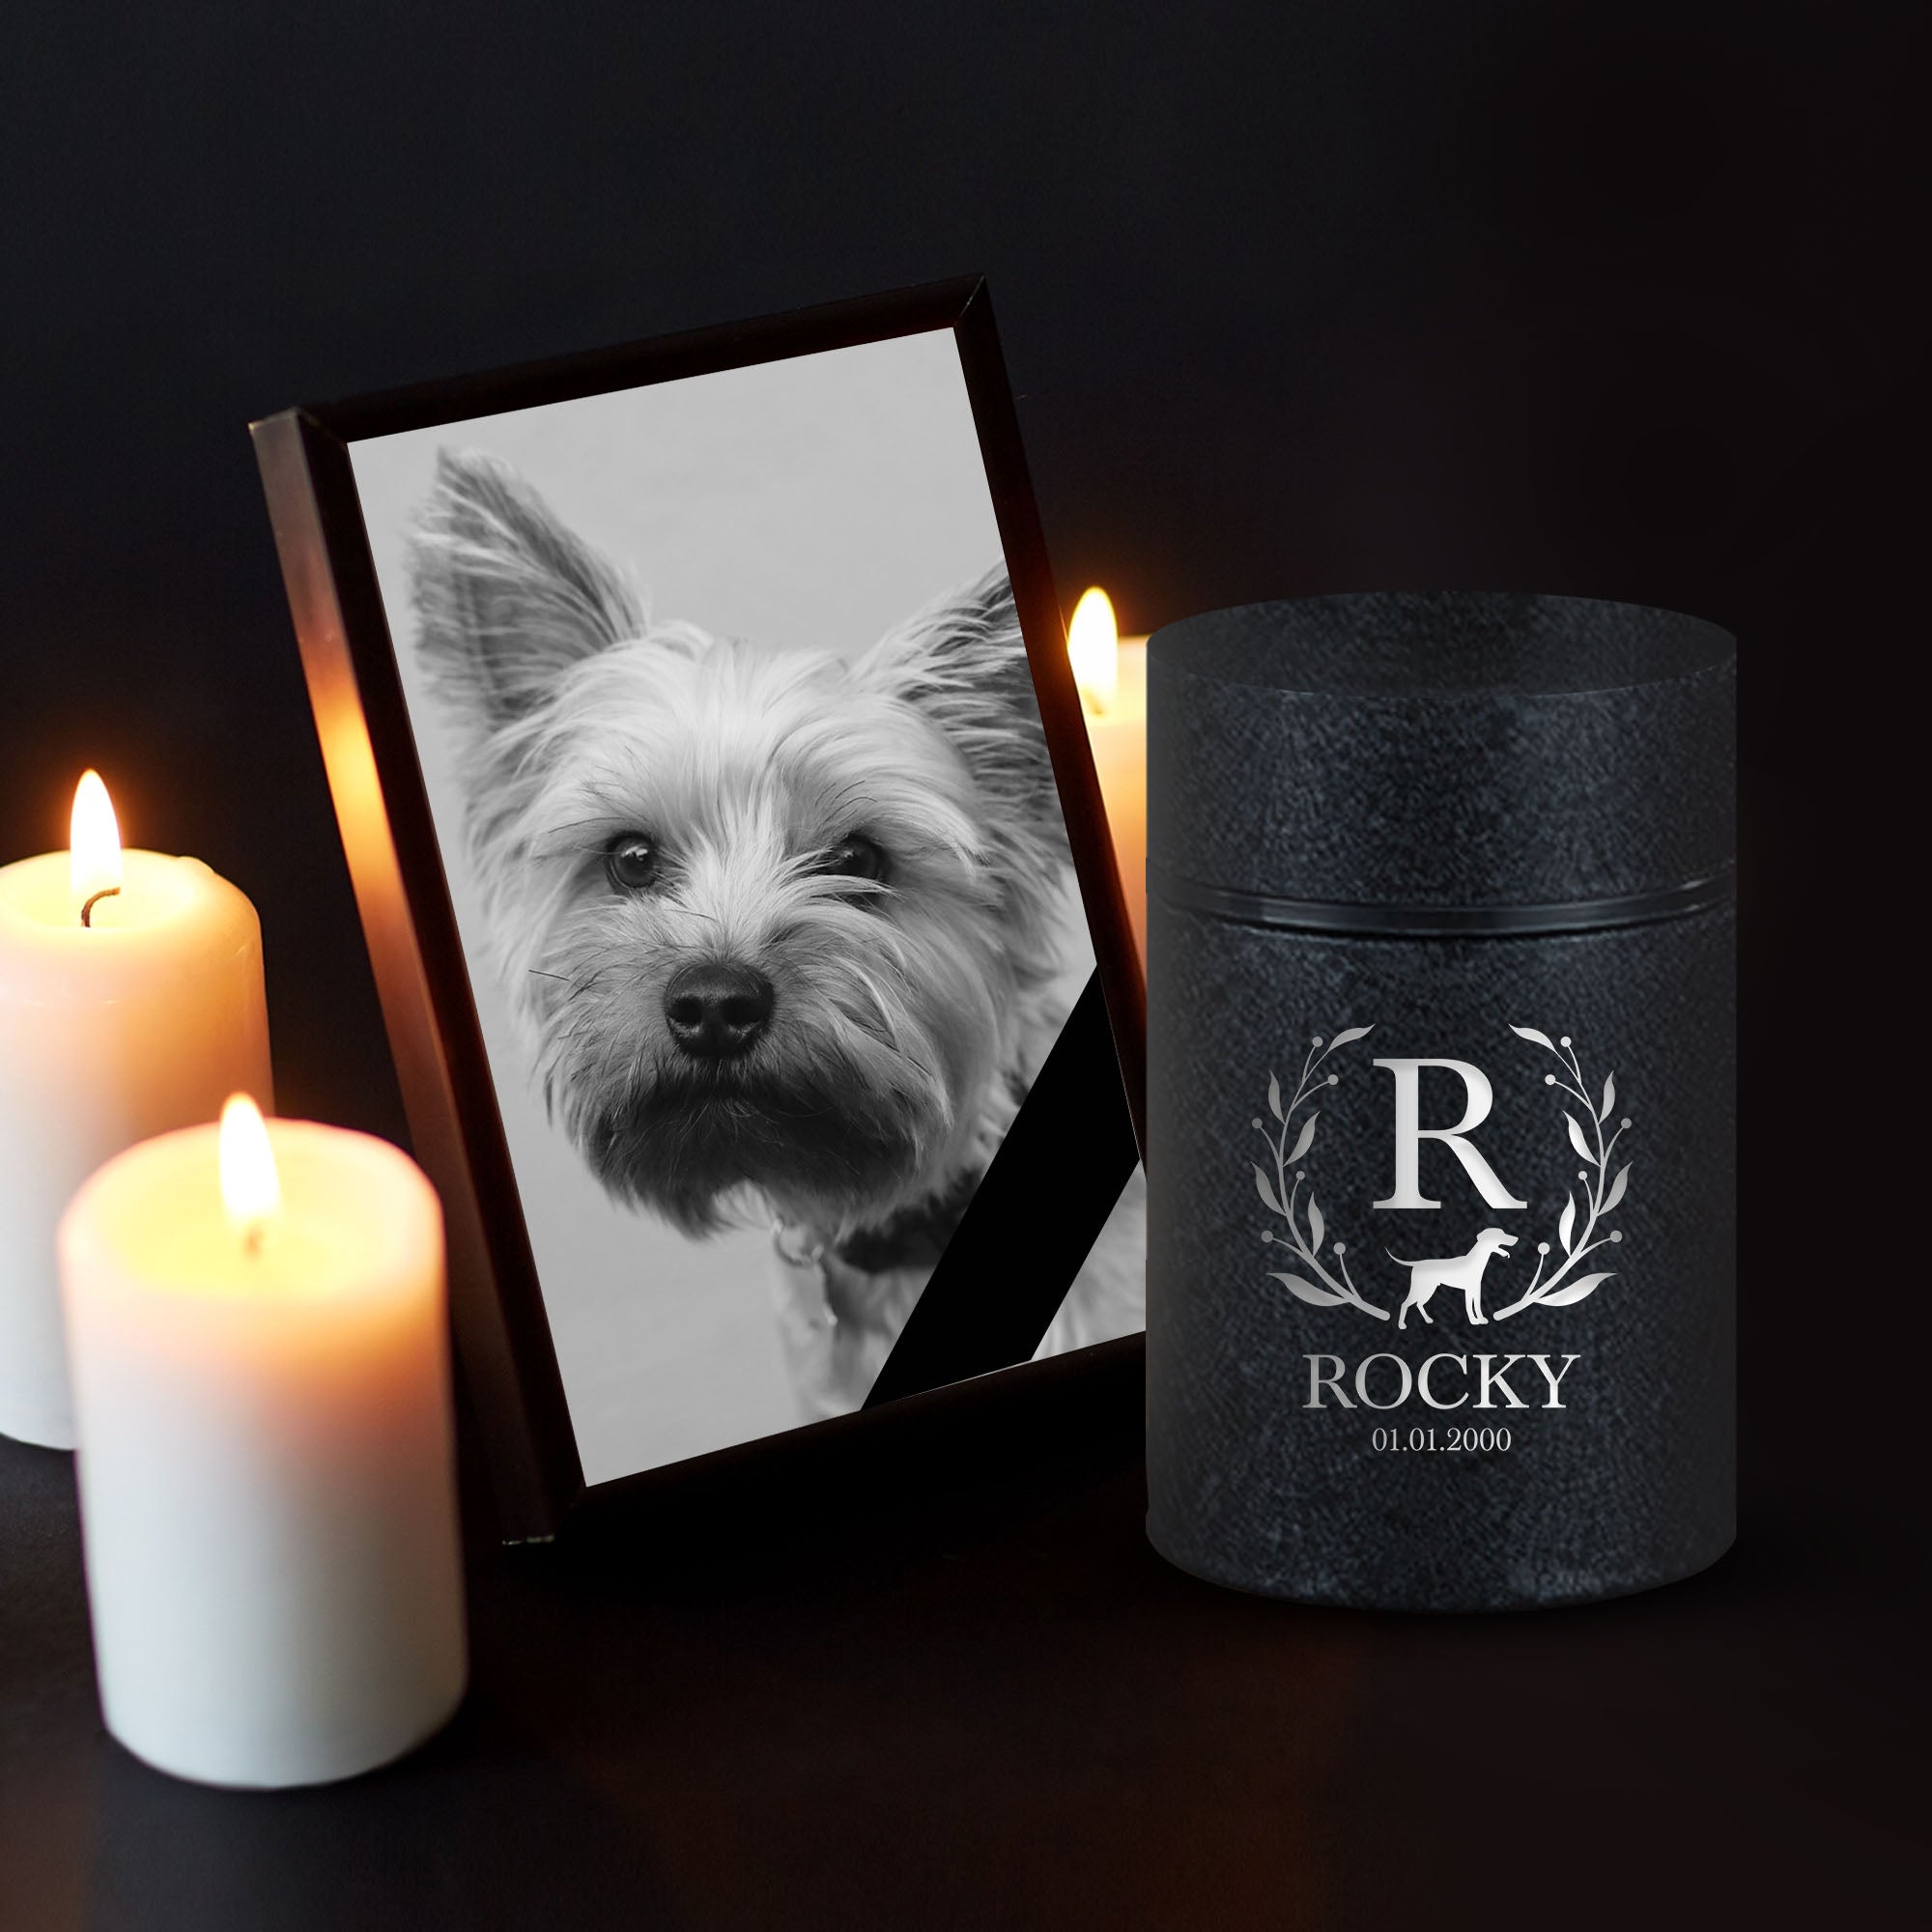 Personalized Custom Compact Mini Urn Keepsake Textured Pet Cremation Urn - Engraved Powder Coat Steel Urn for Dog Memorial Ashes | 3.2" x 2" (4-8 lb Capacity)